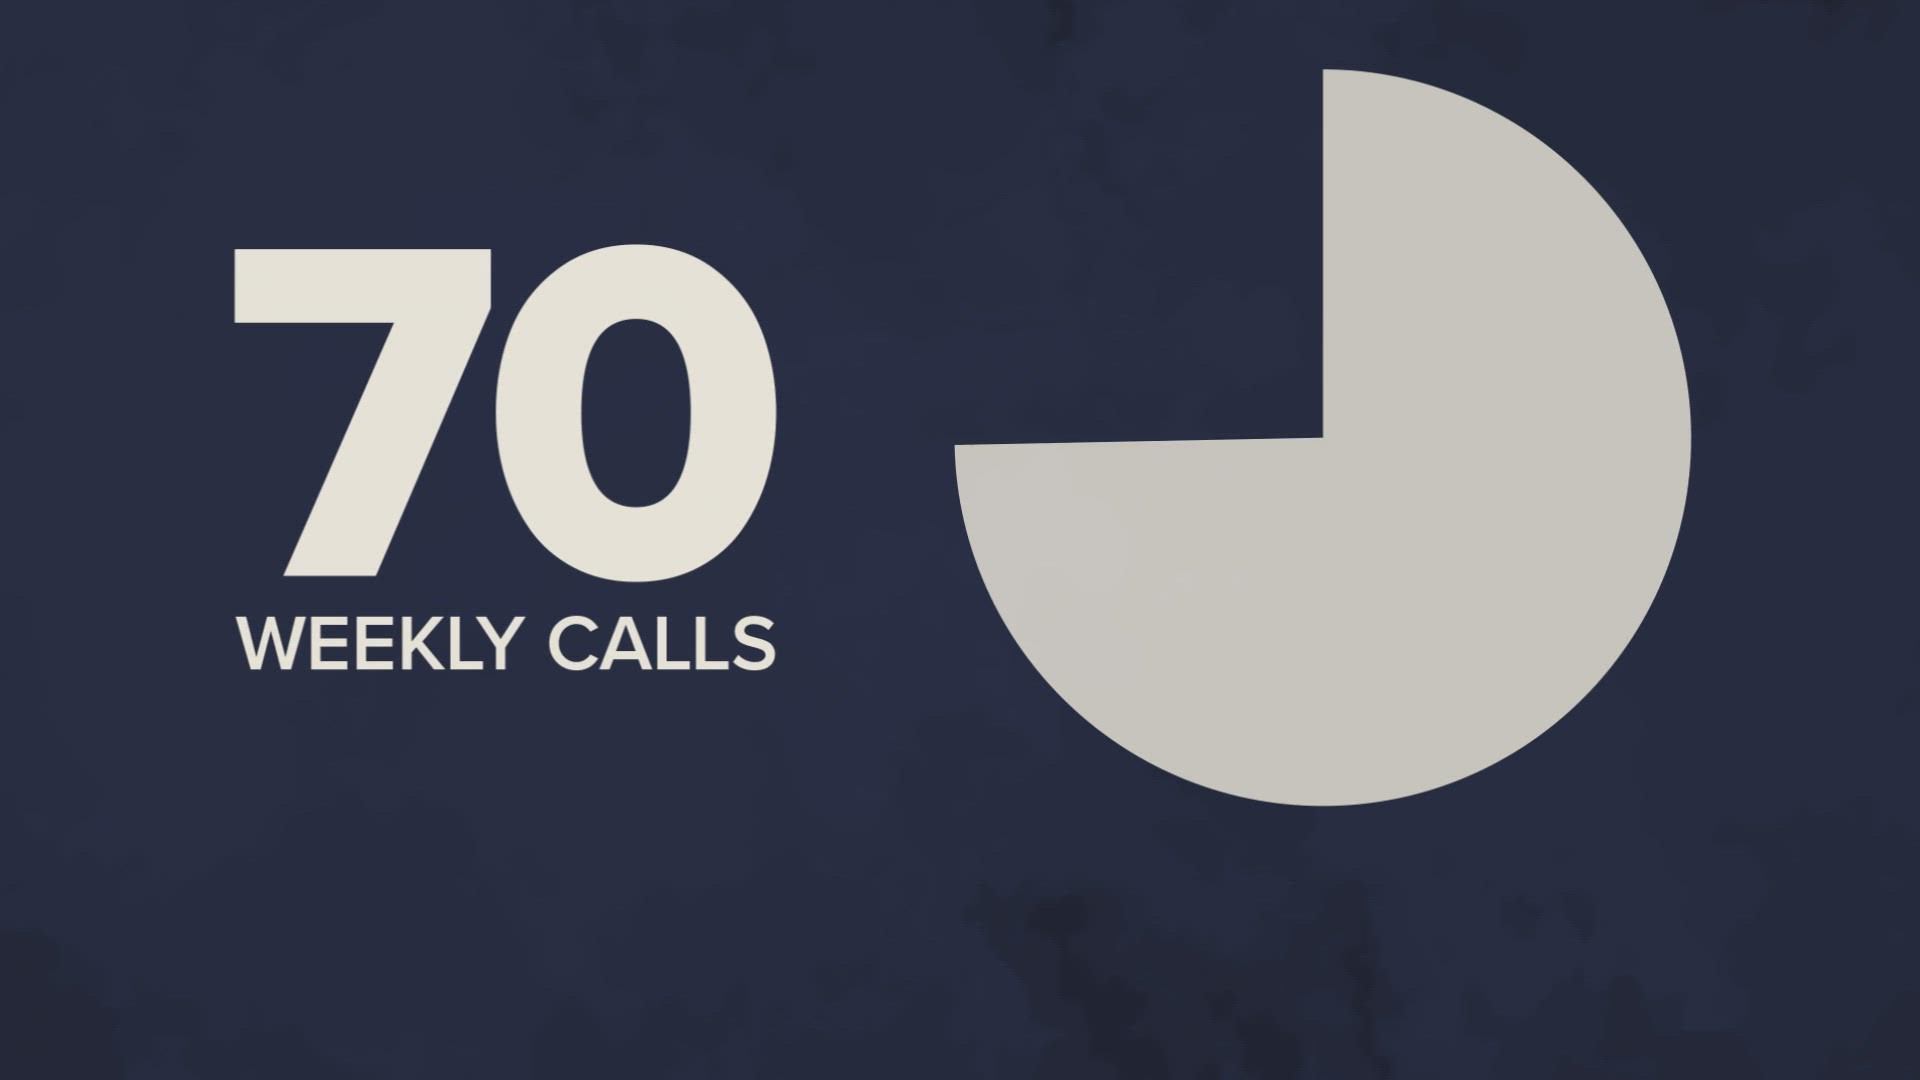 Of 70 weekly calls, roughly a third are repeat women.